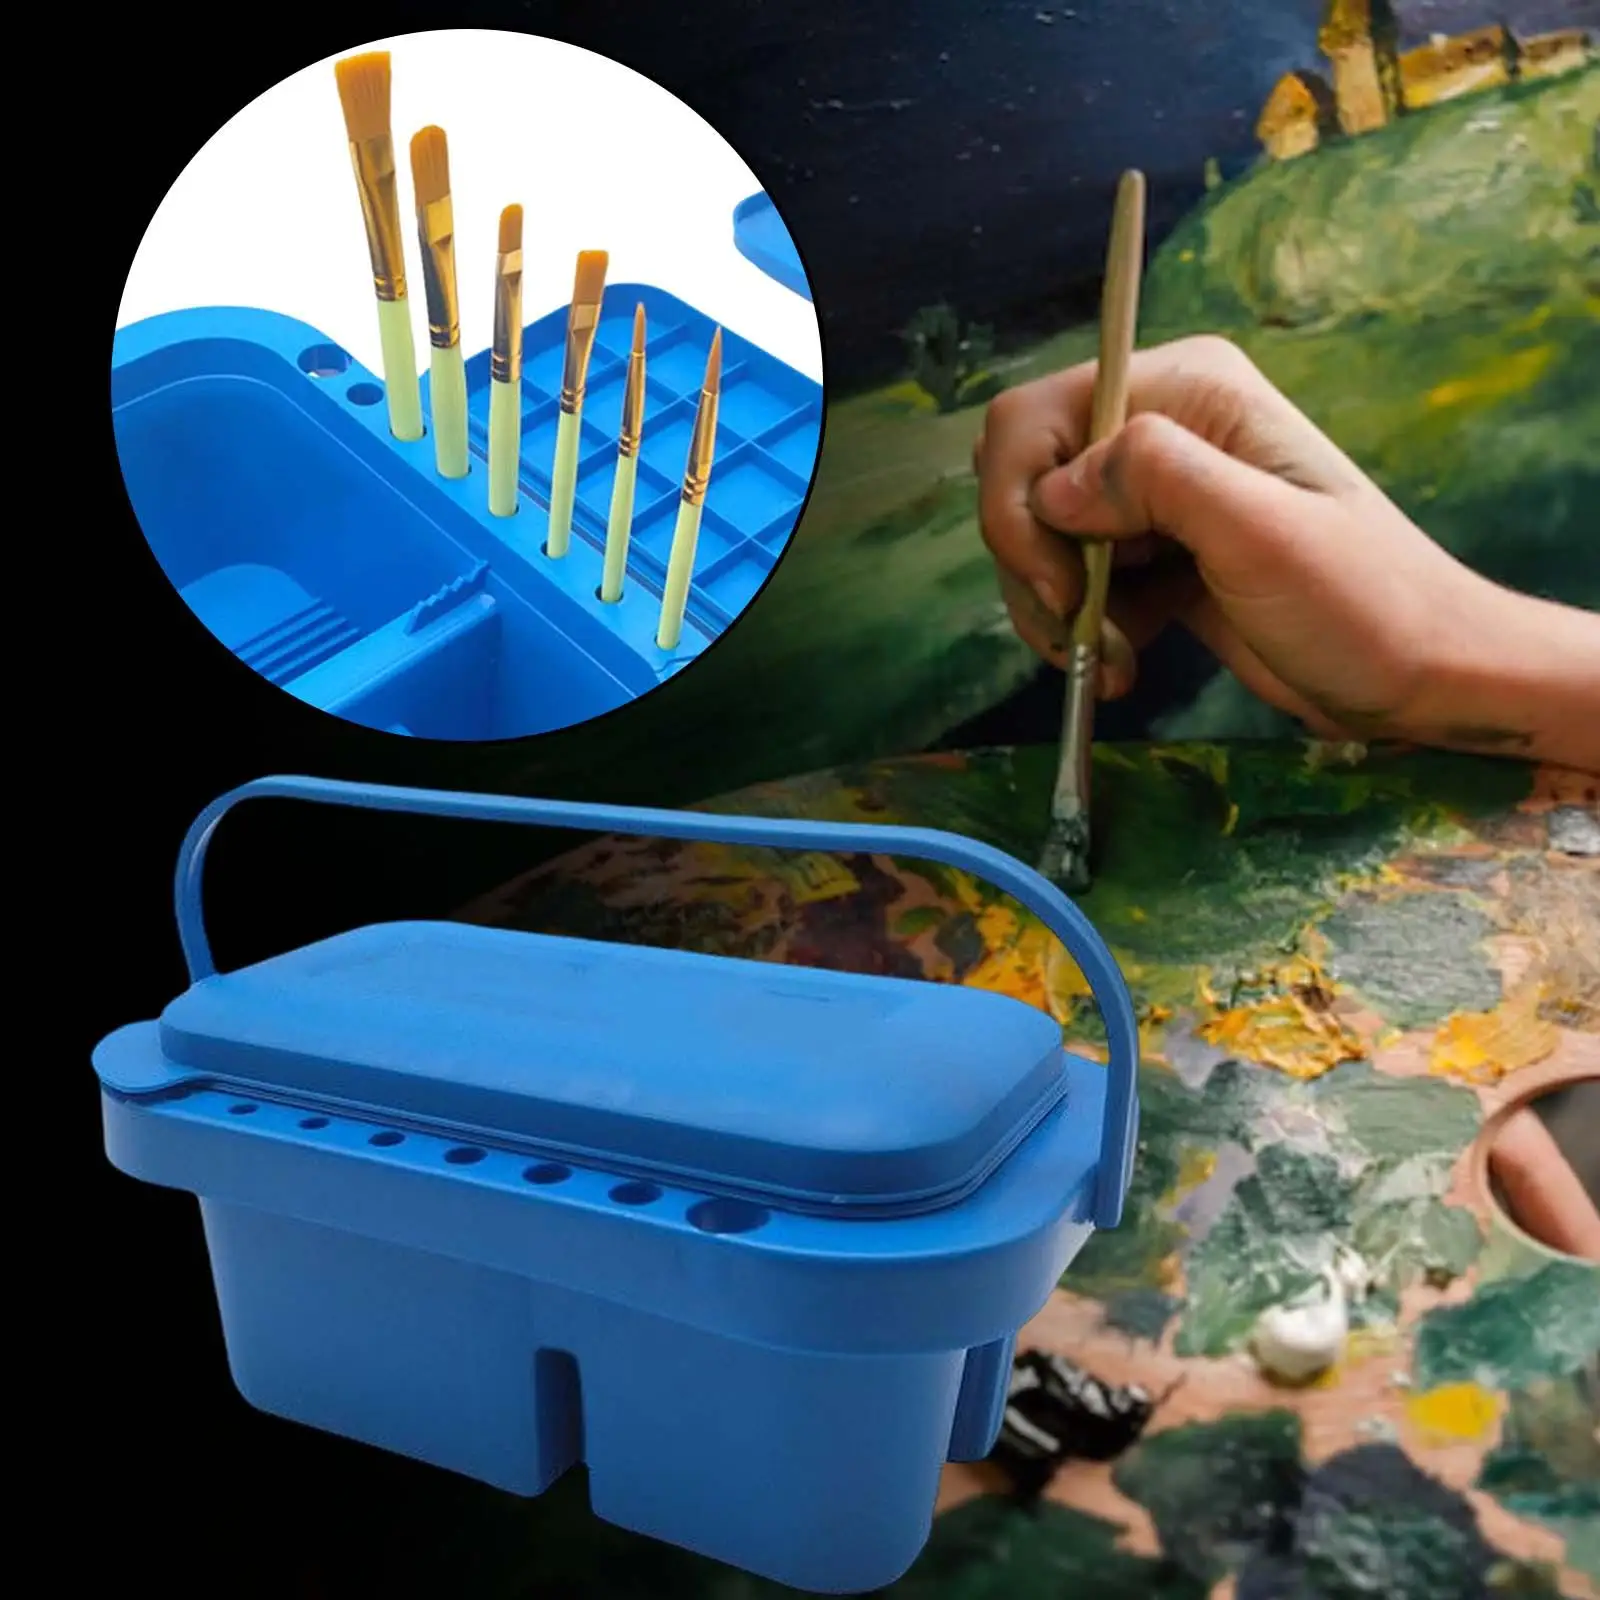 Paint Brush Basin Convenient Brush Holder Wash Pen Barrel Paint Paint Brush Paint Brush Washing Bucket for Painting Cleaner